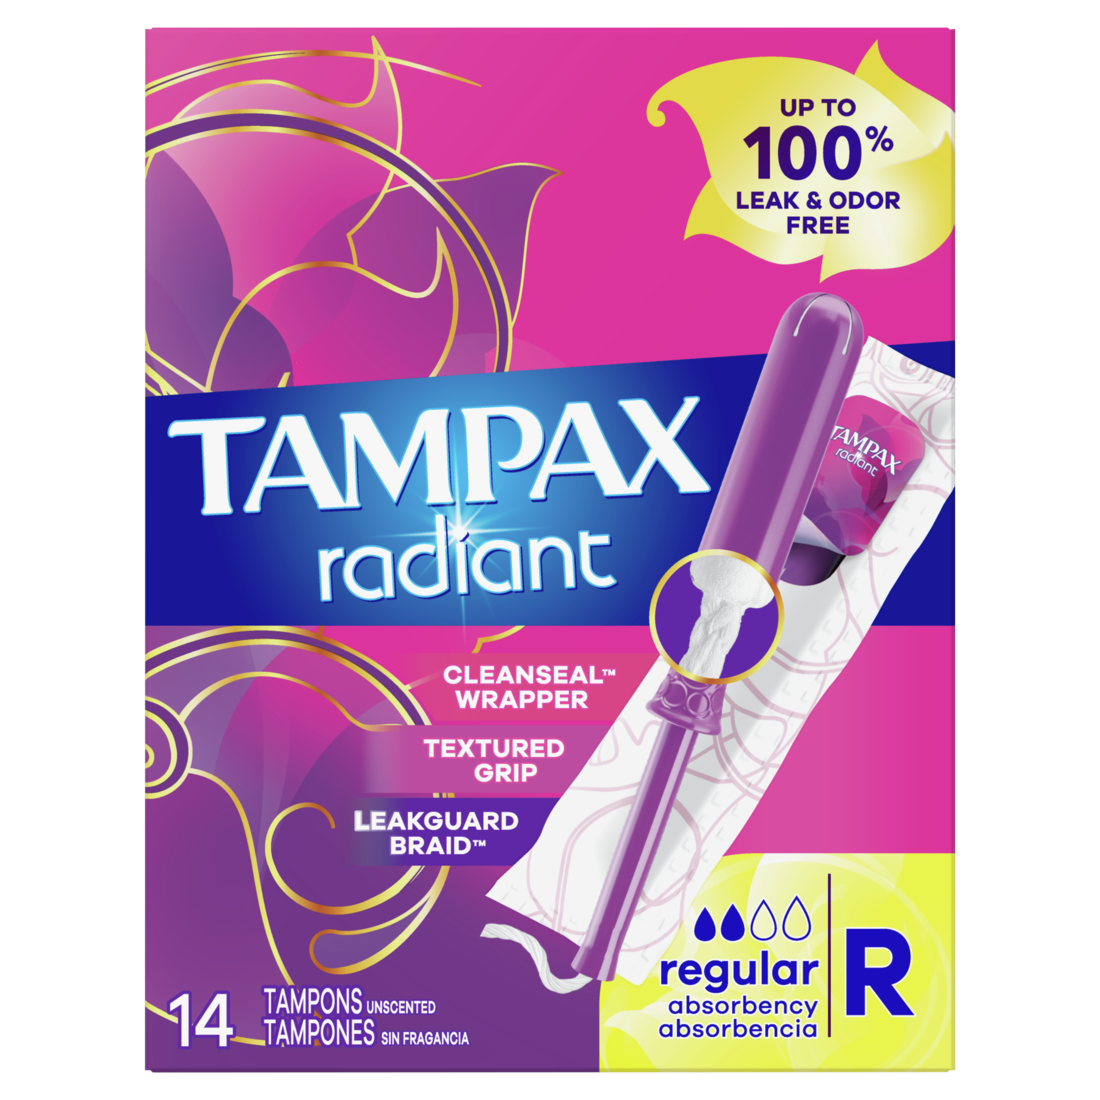 Tampax Radiant Cleanseal Wrapper Leakguard Braid - 14ct/12pk